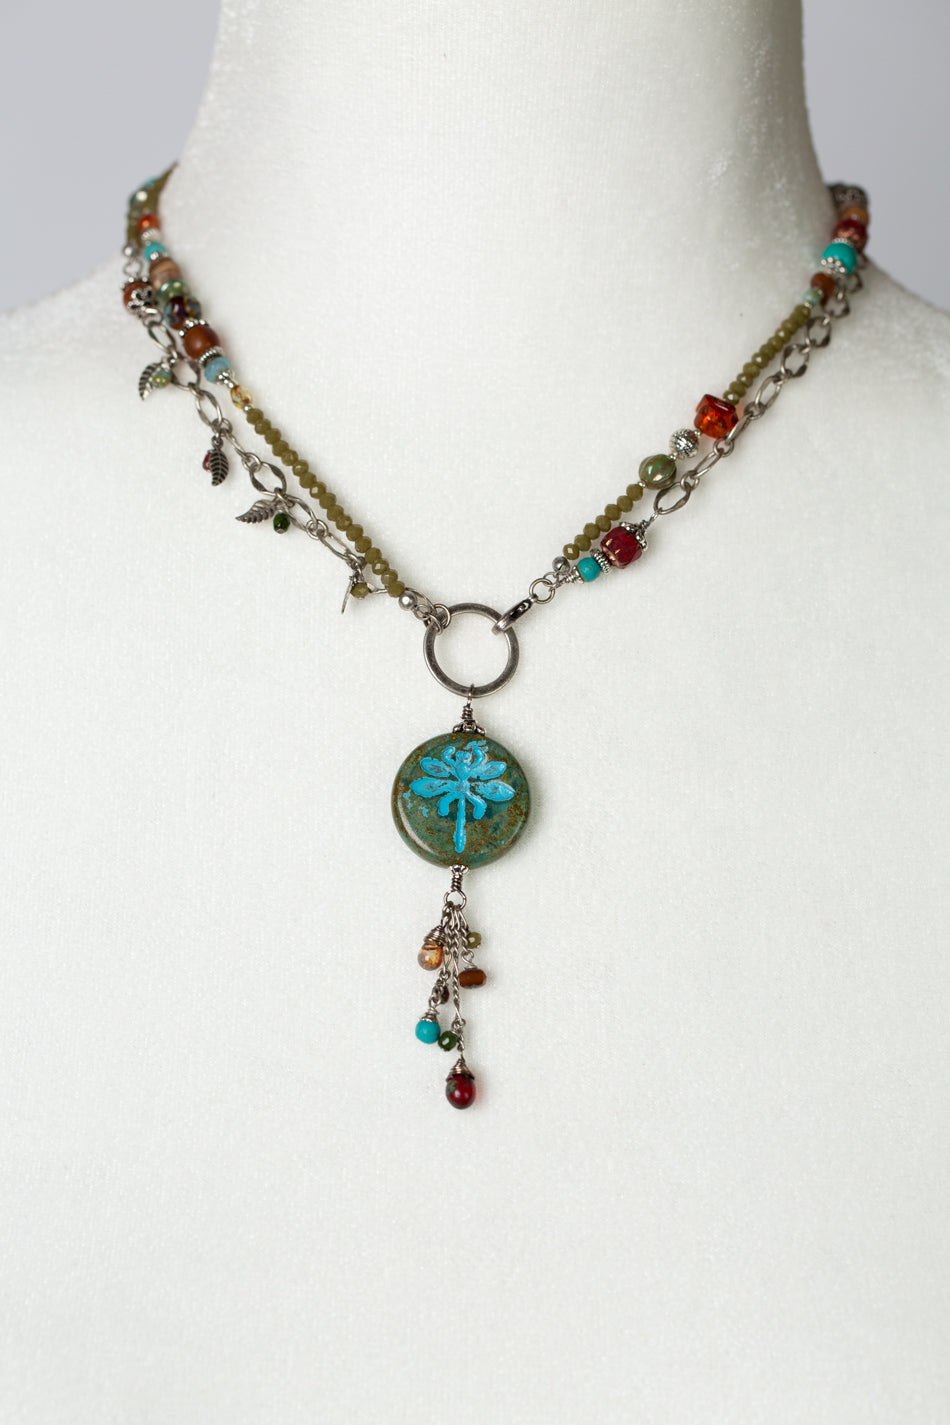 Lakeside 17 or 33.5" Turquoise, Crystal With Czech Glass Collage Necklace